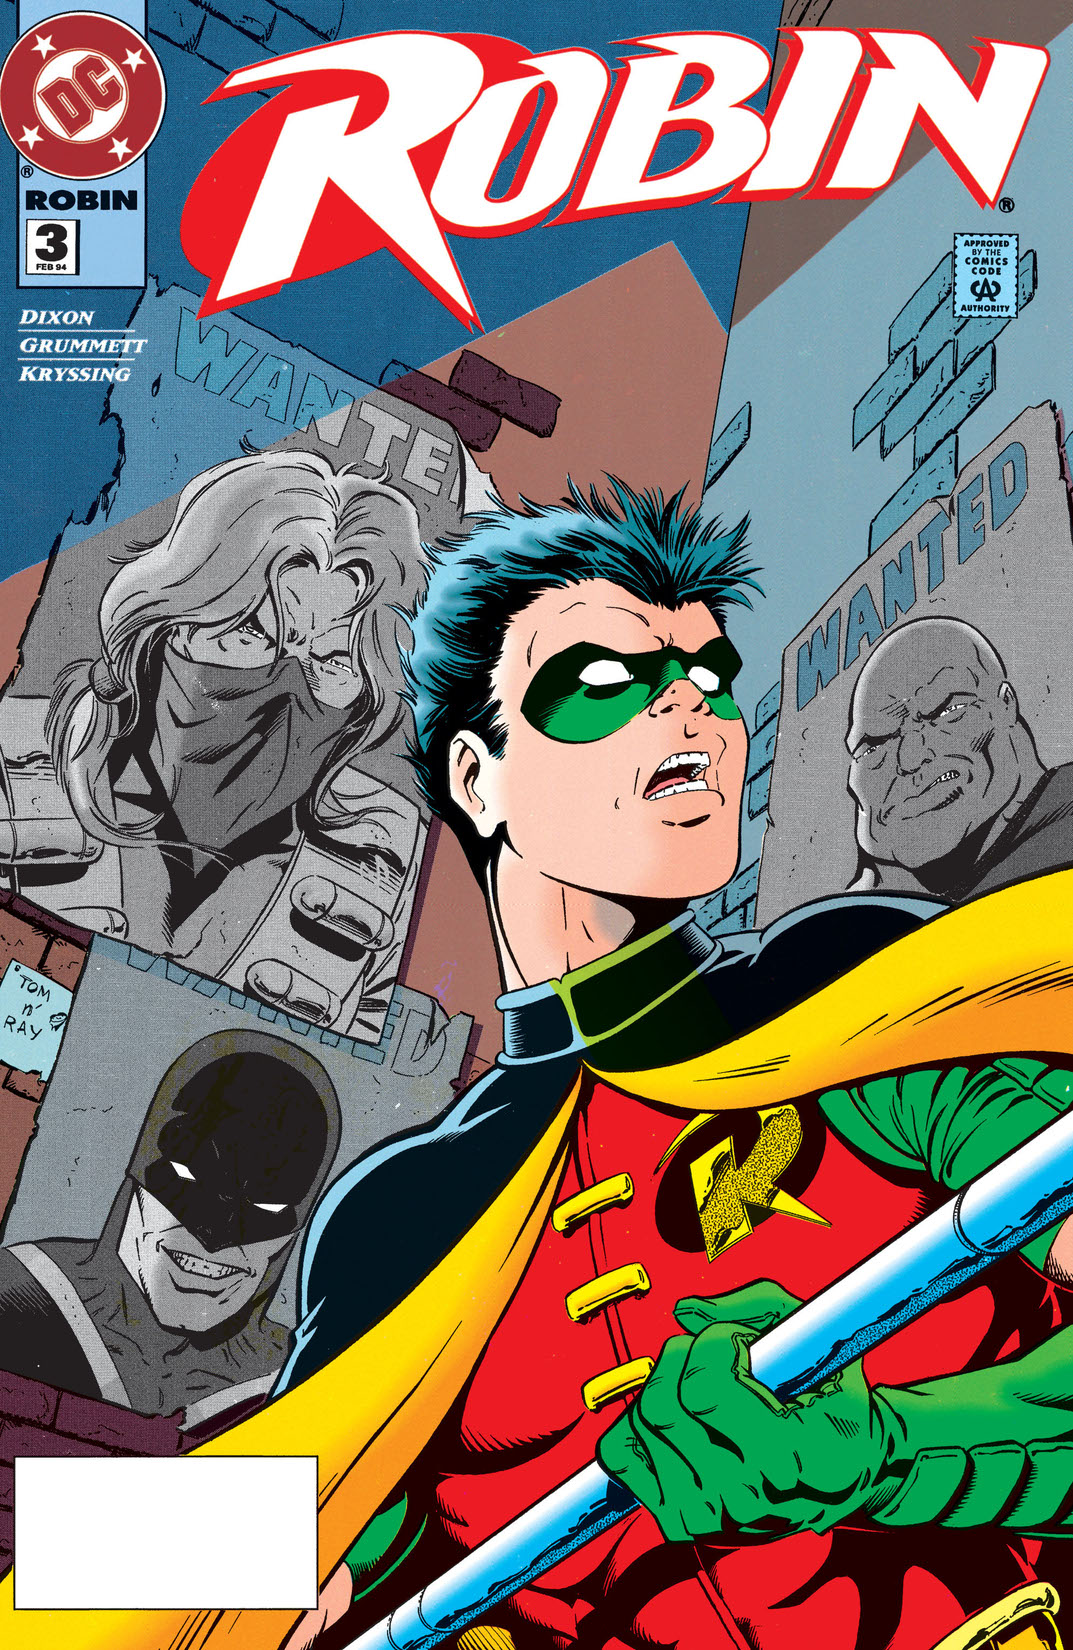 Robin (1993-2009) #3 preview images